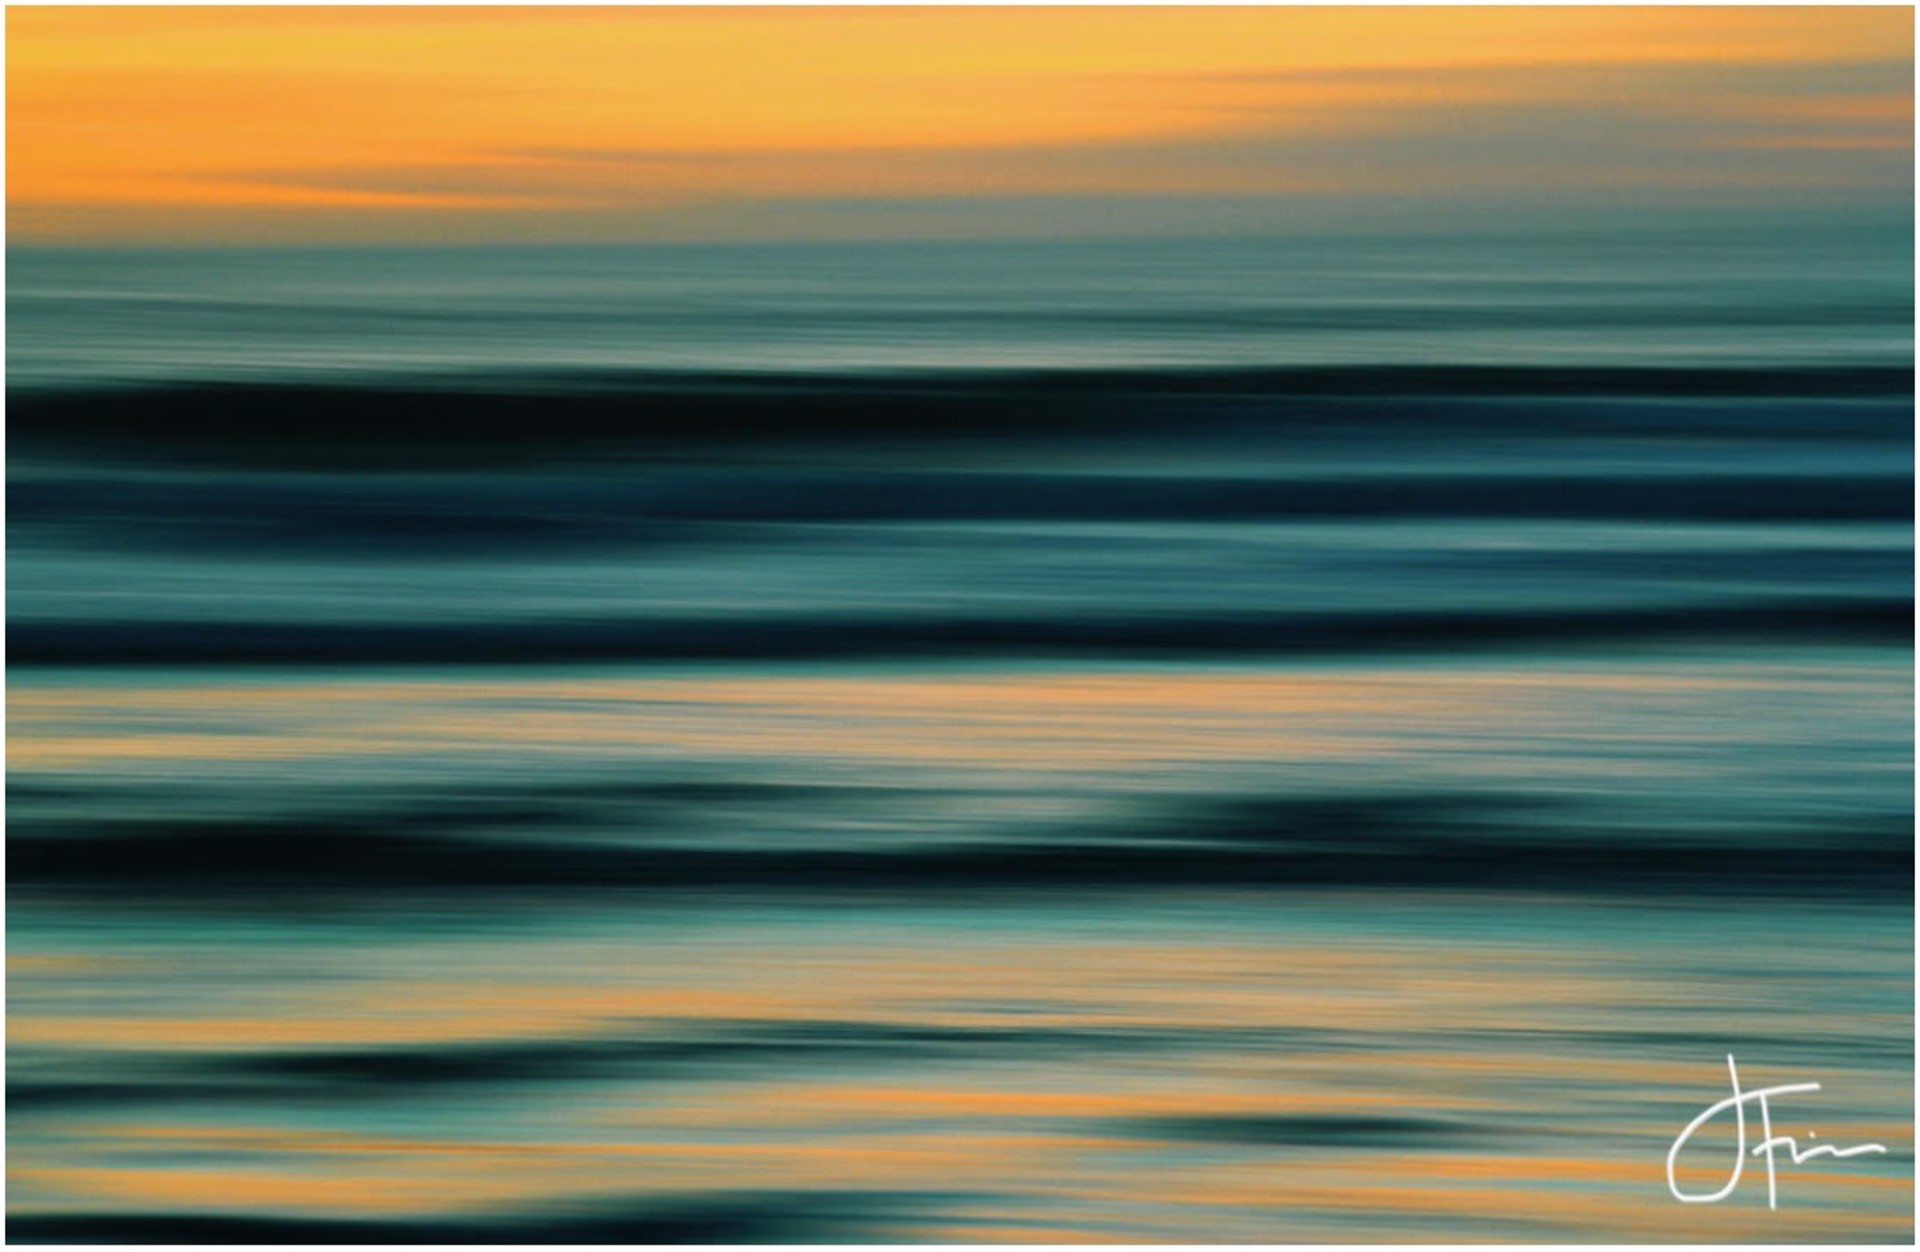 Encinitas Fall by Abstracts on Brushed Aluminum